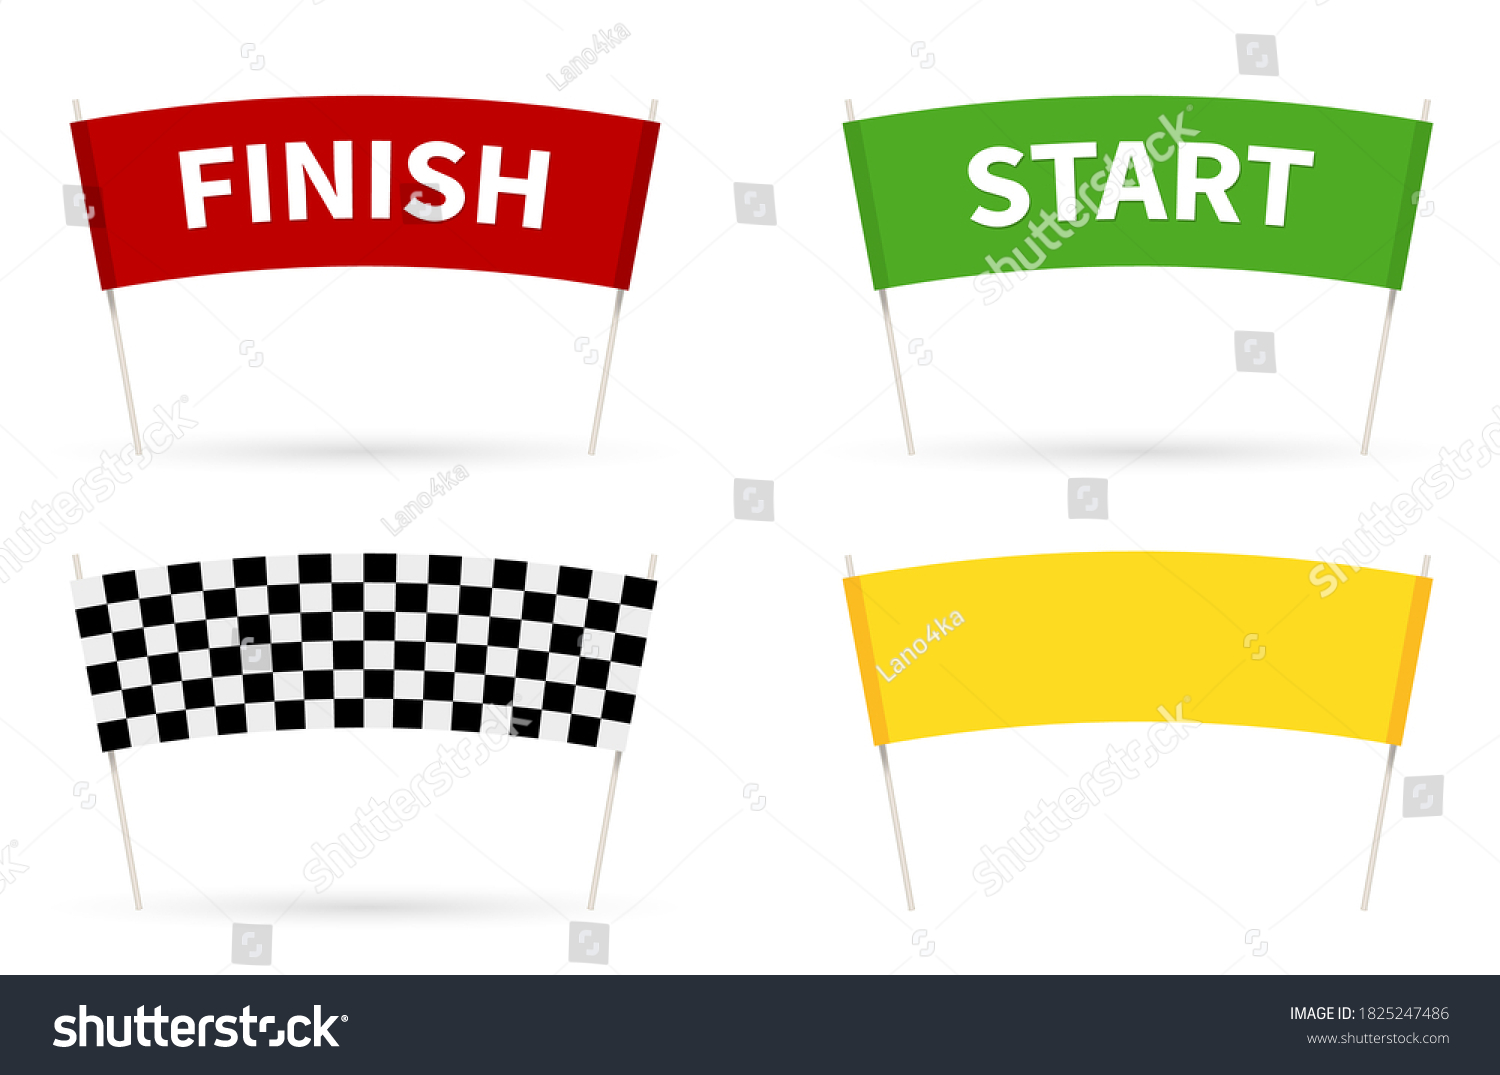 Flag Start. Flag finish for the competition. streamers of Start and Finish in flat style. 4 different colors of a finish line.  vector illustration isolated on white. #1825247486